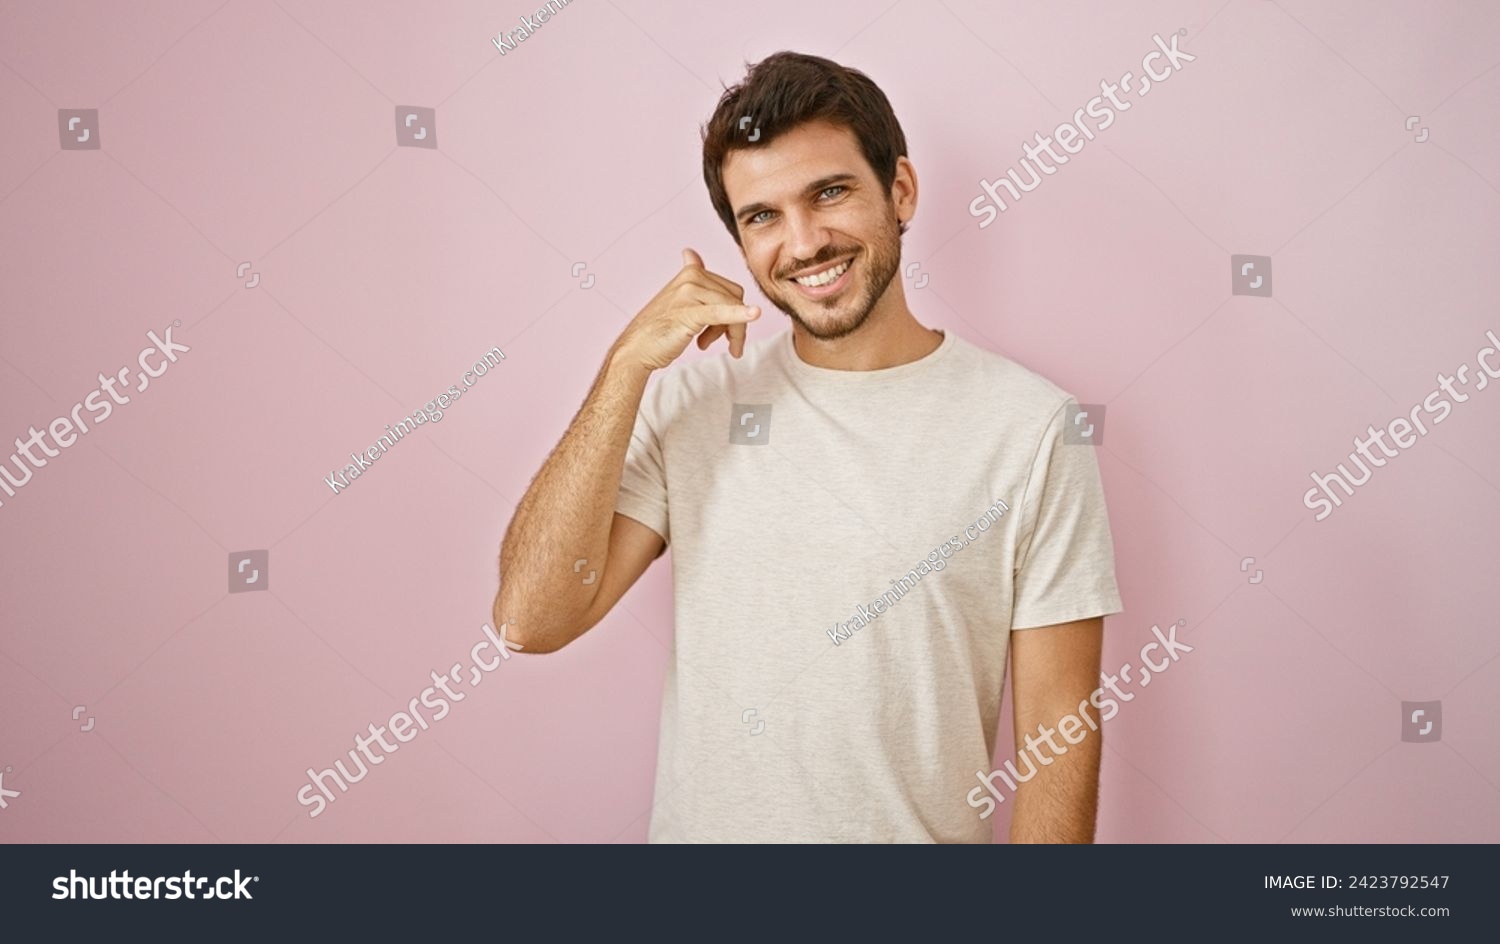 Smiling young hispanic man with beard making call me gesture against a pink isolated background #2423792547